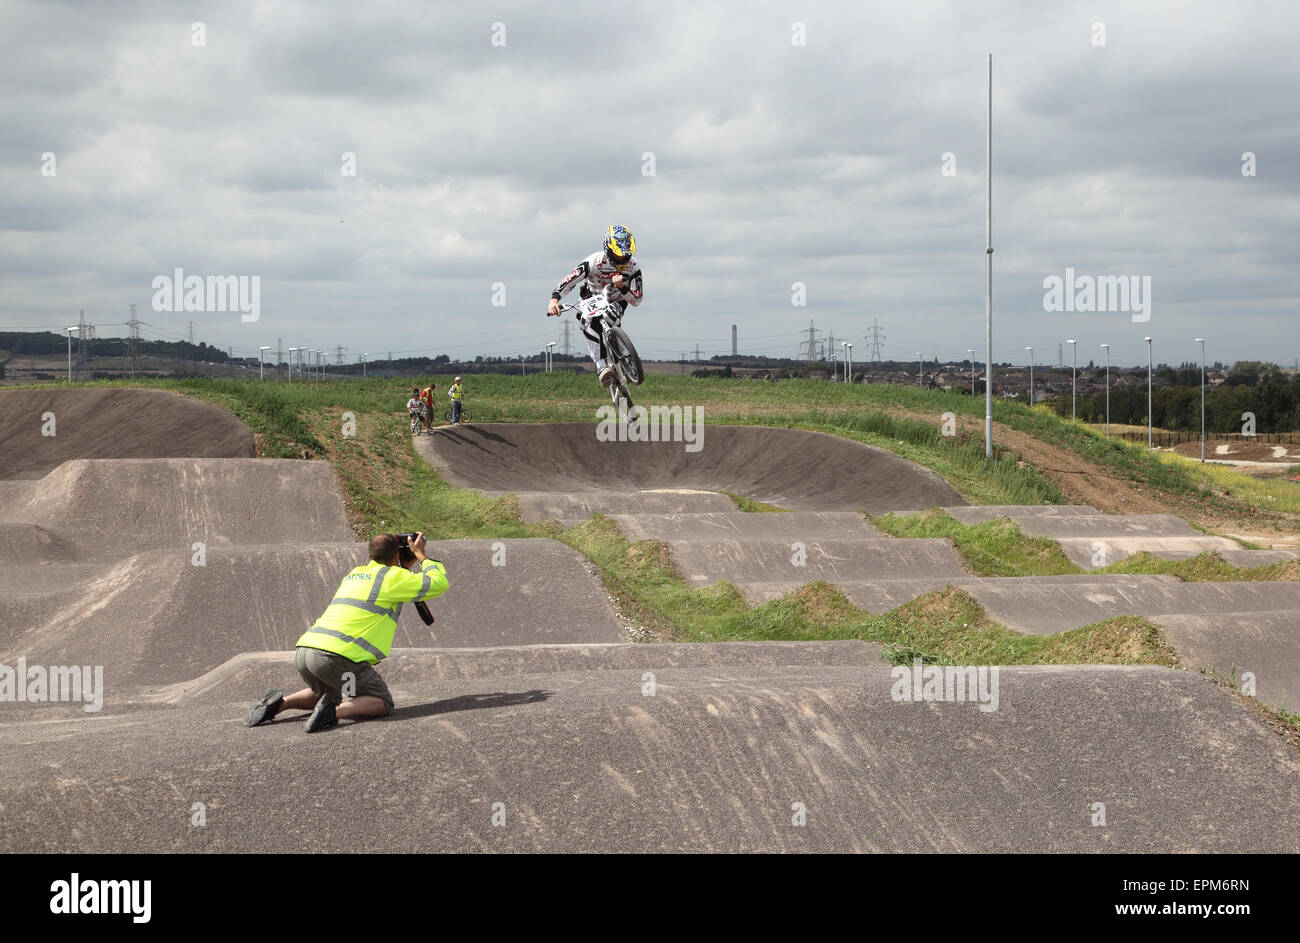 A photographer shoots a BMX bike rider as they perform a jump at the Gravesend Cyclopark, Kent, UK. Stock Photo